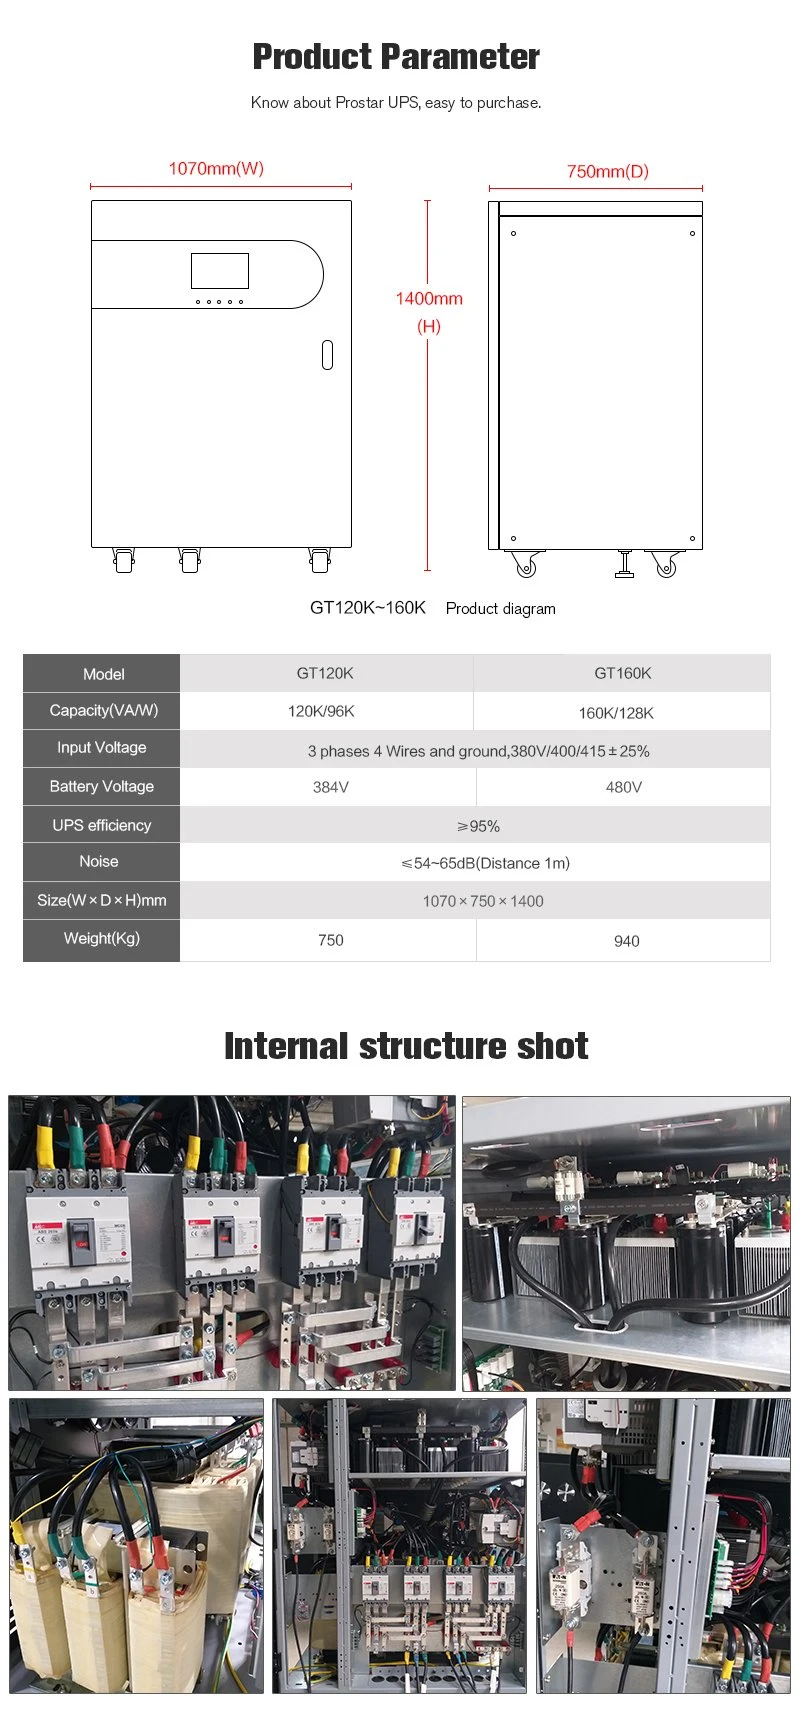 160kVA Three Phase Industrial-Grade Online Low Frequency UPS Transformer Based